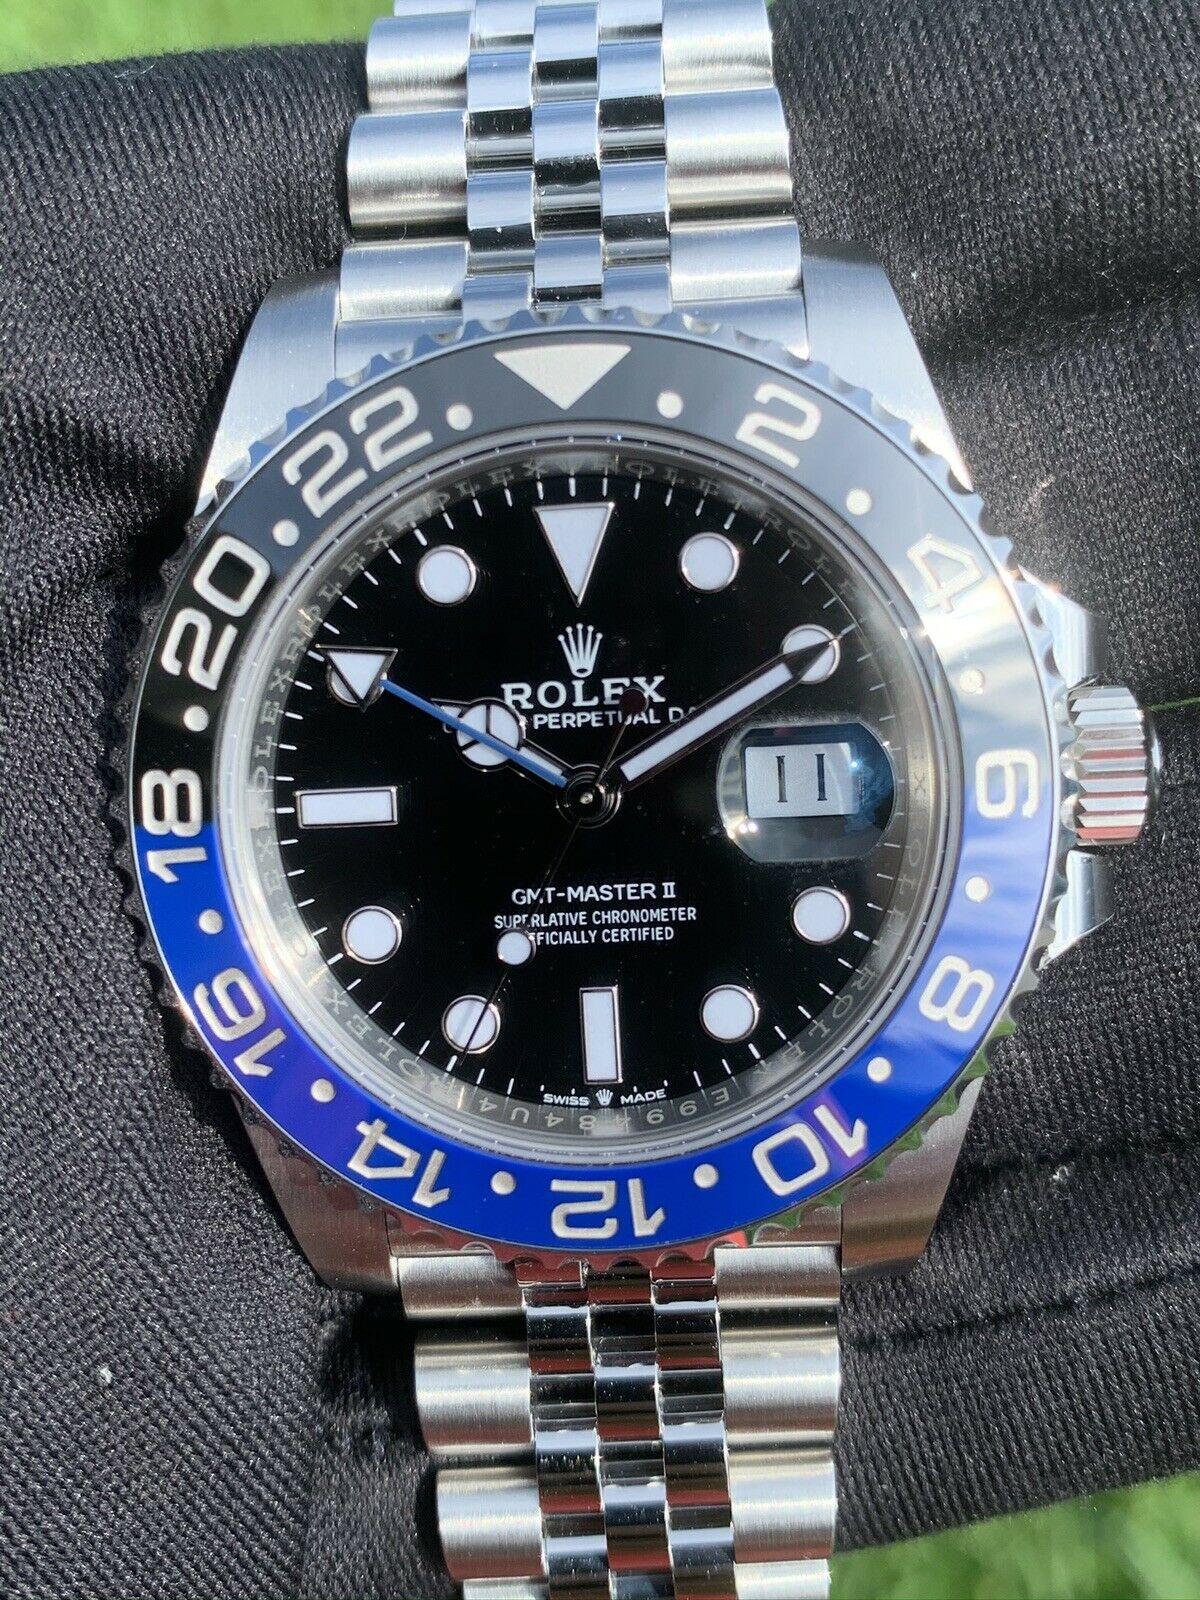 Brand - Rolex 
Model - GMT-Master II 
Ref Number - 126710BLNR “Batgirl”
Dial - Black 
Bezel - Black and Blue Ceramic 
Movement - Automatic 
Includes - Watch and Card 